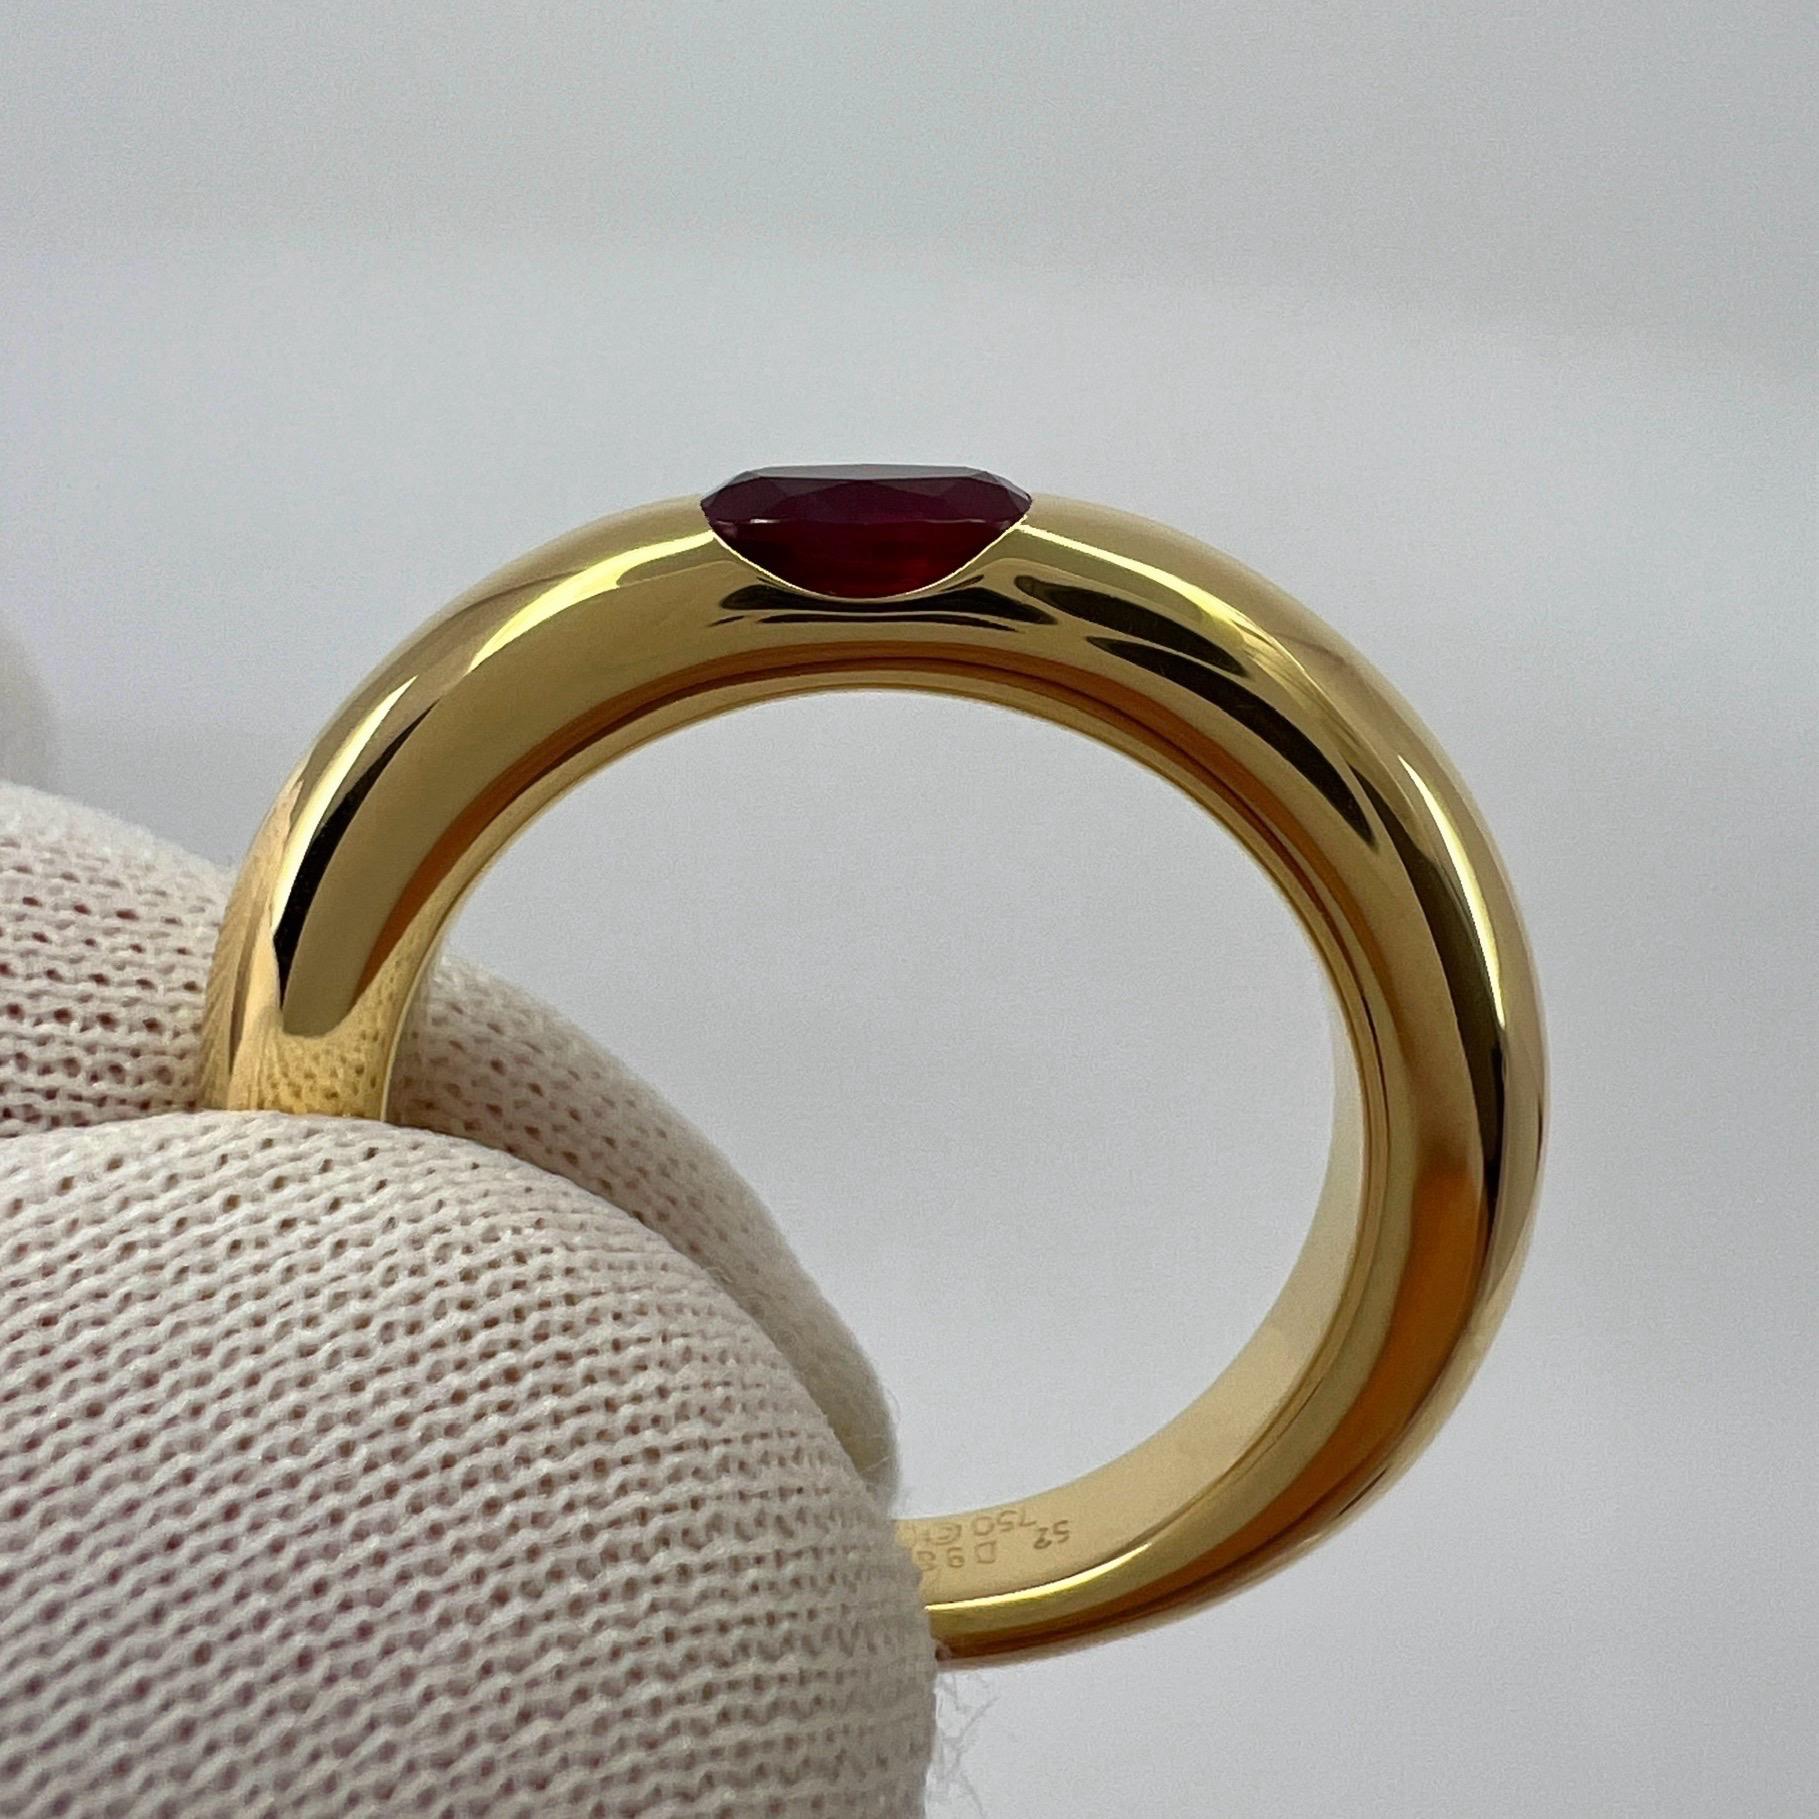 Vintage Cartier Deep Red Ruby Ellipse 18k Yellow Gold Oval Solitaire Ring 52 US6 3